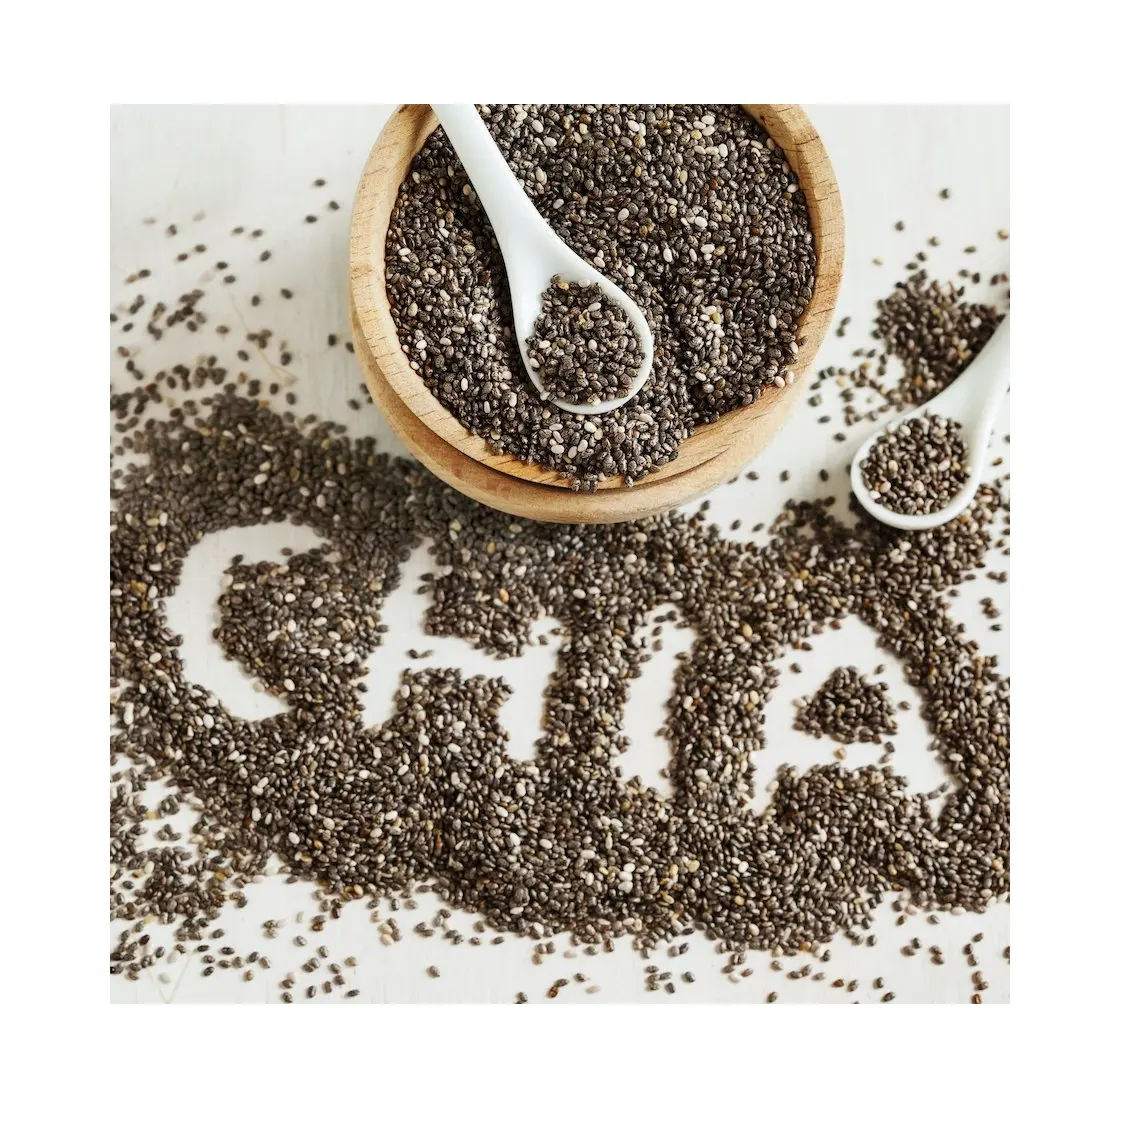 Raw 99% Chia Seeds Available